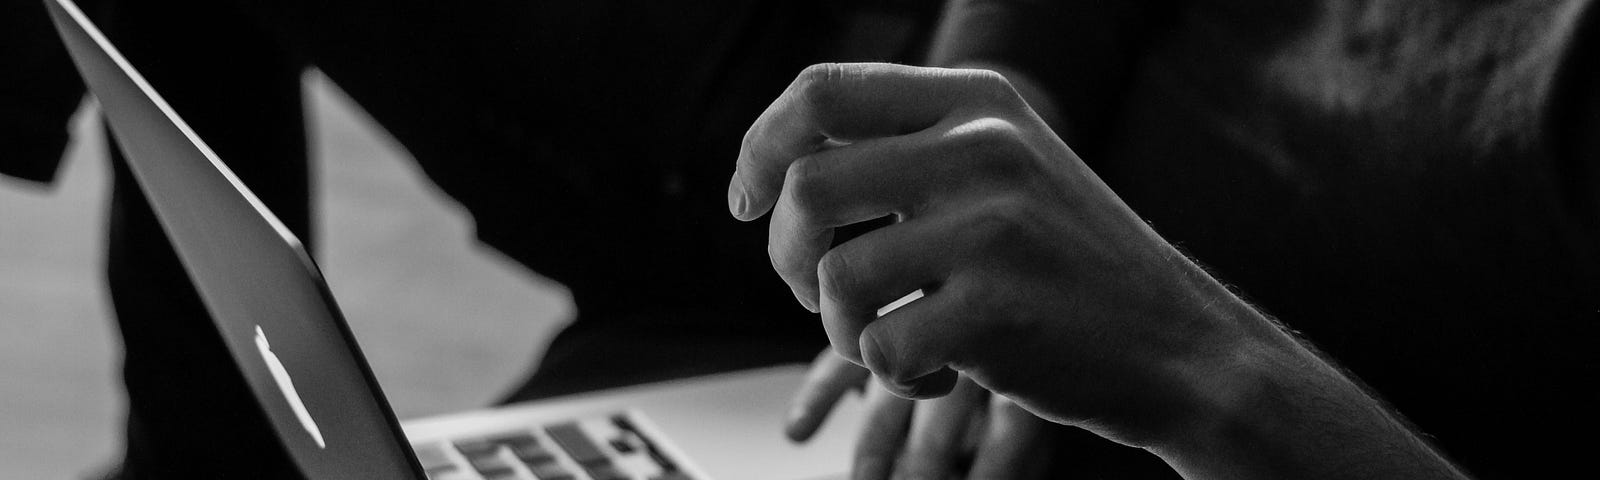 Black and white image of hands and a laptop.